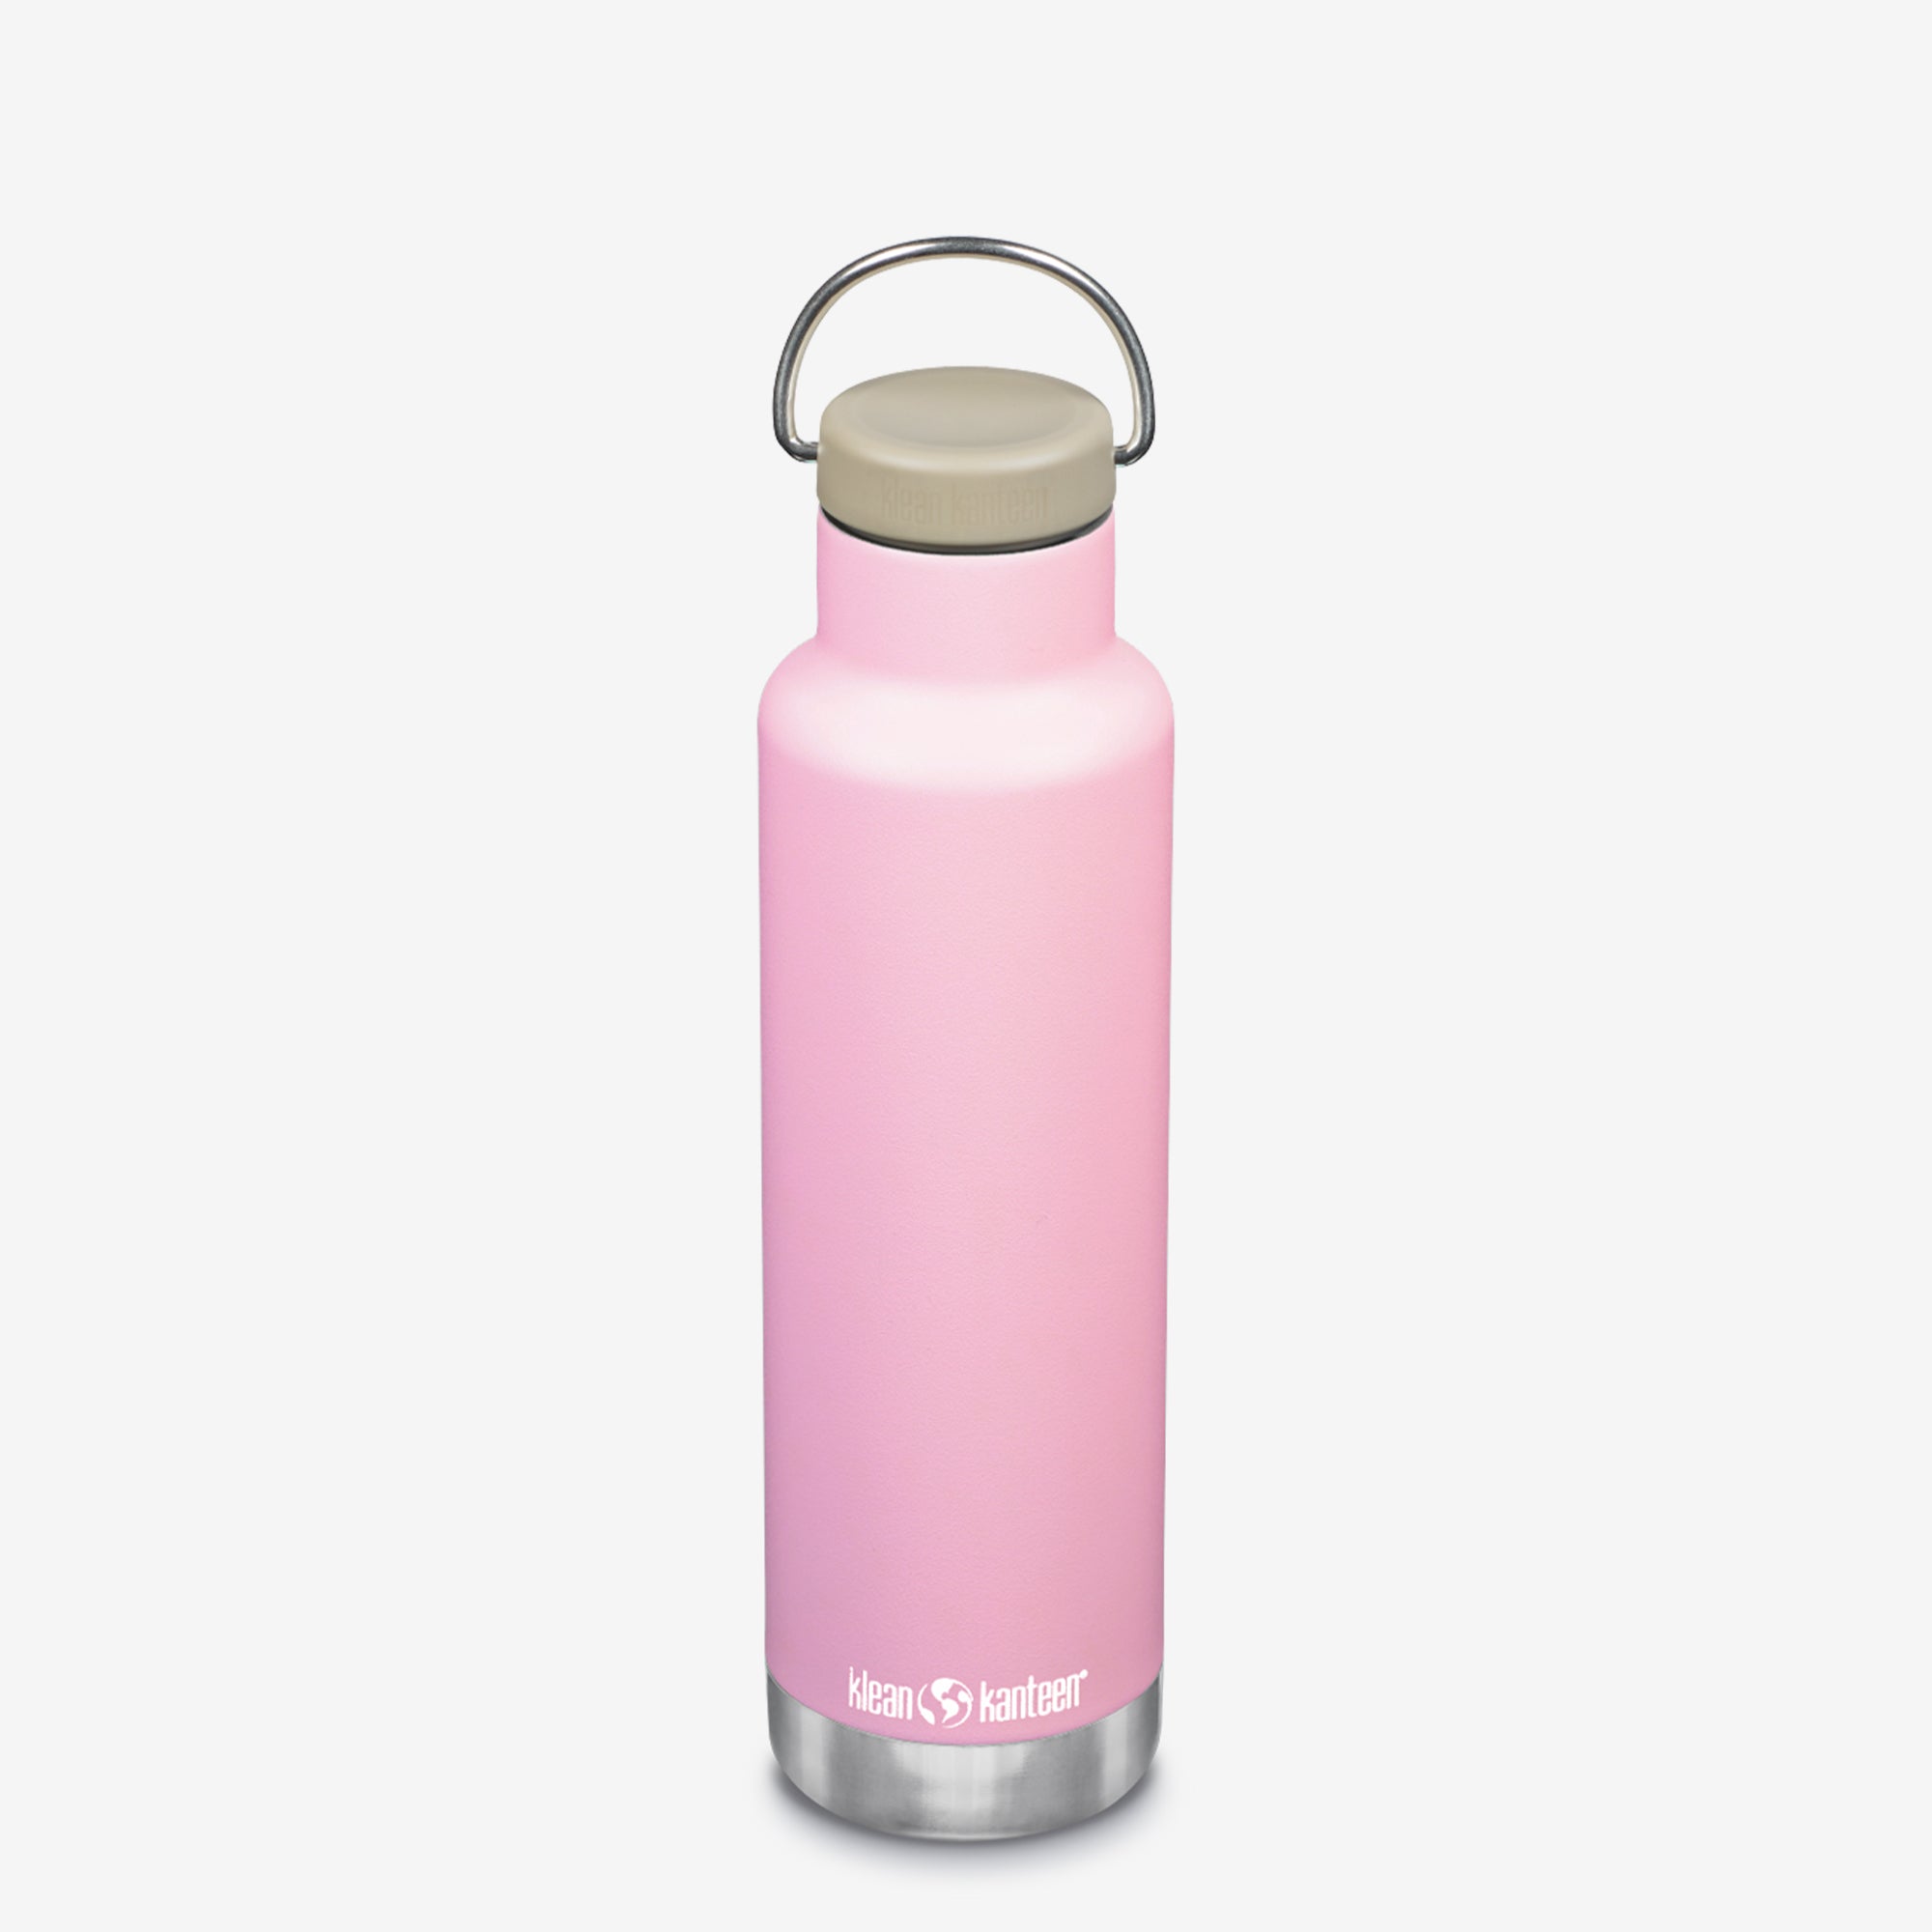 Klean Kanteen 20 oz Classic Insulated Water Bottle with Loop Cap - Gimme  the Good Stuff